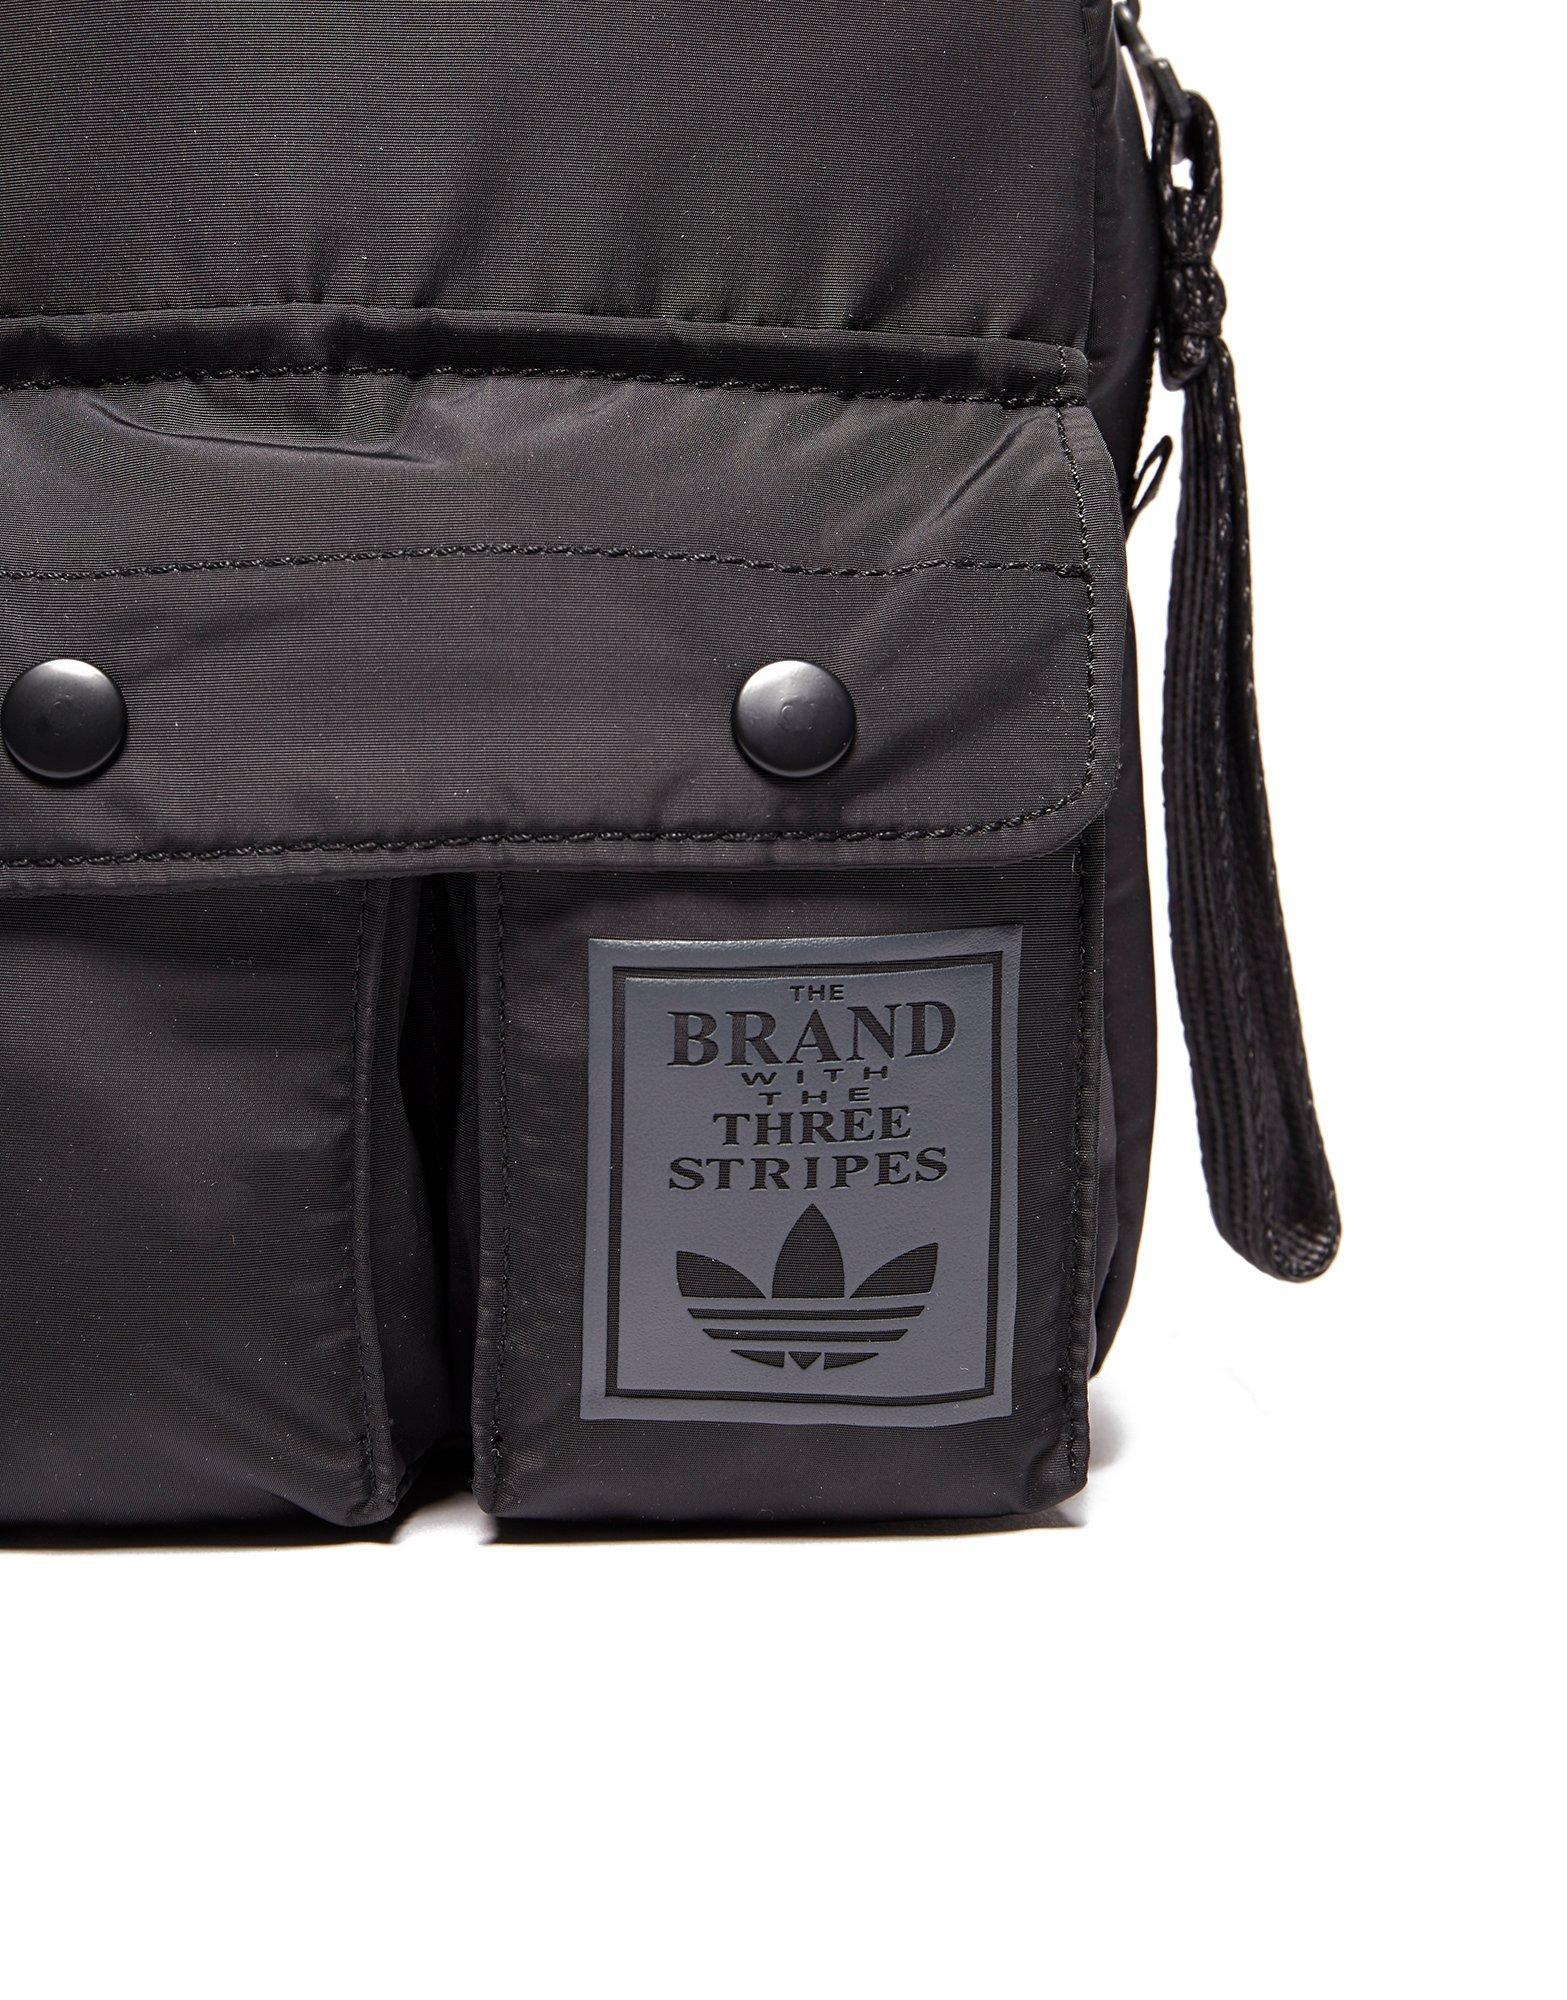 the brand with the three stripes bag